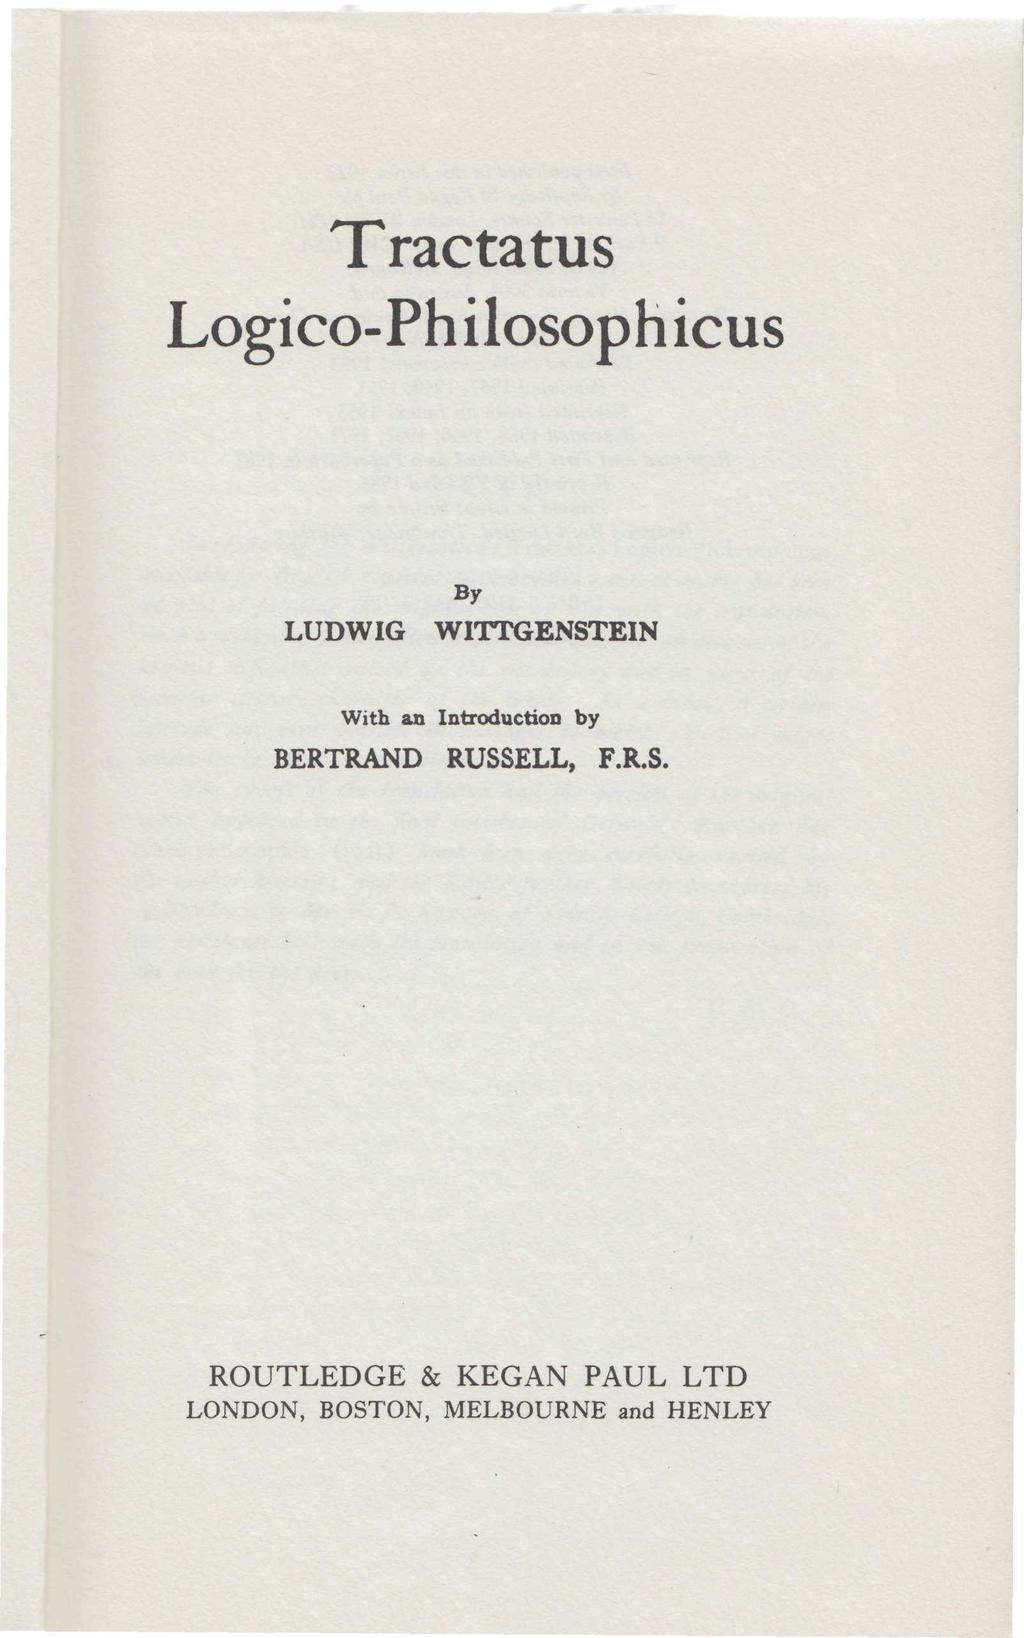 Tractatus Logico-Philosophicus LUDWIG By WITTGENSTEIN With an Introduction by